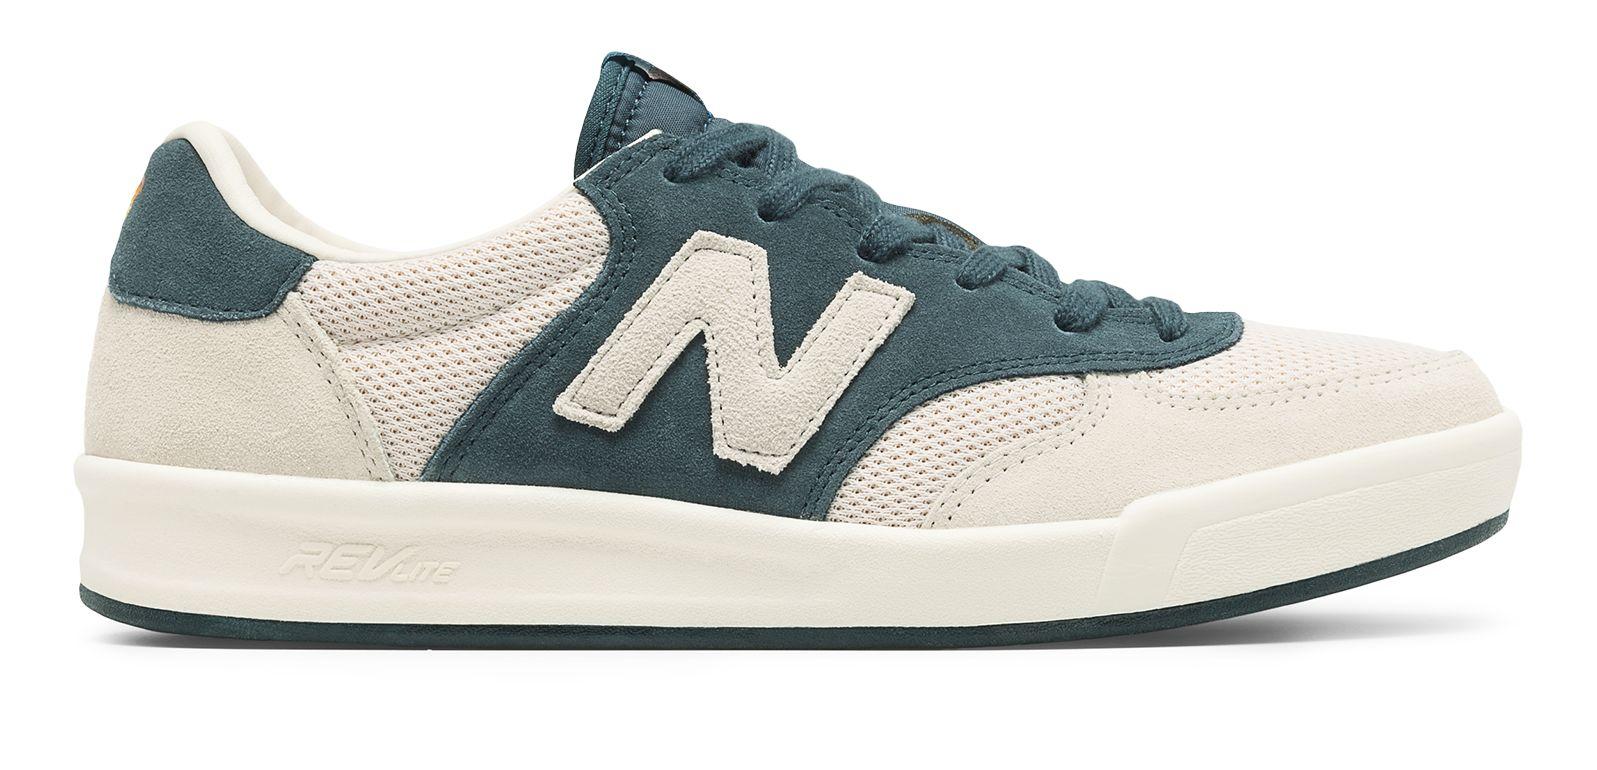 New Balance Rubber 300 Marine Layer in 